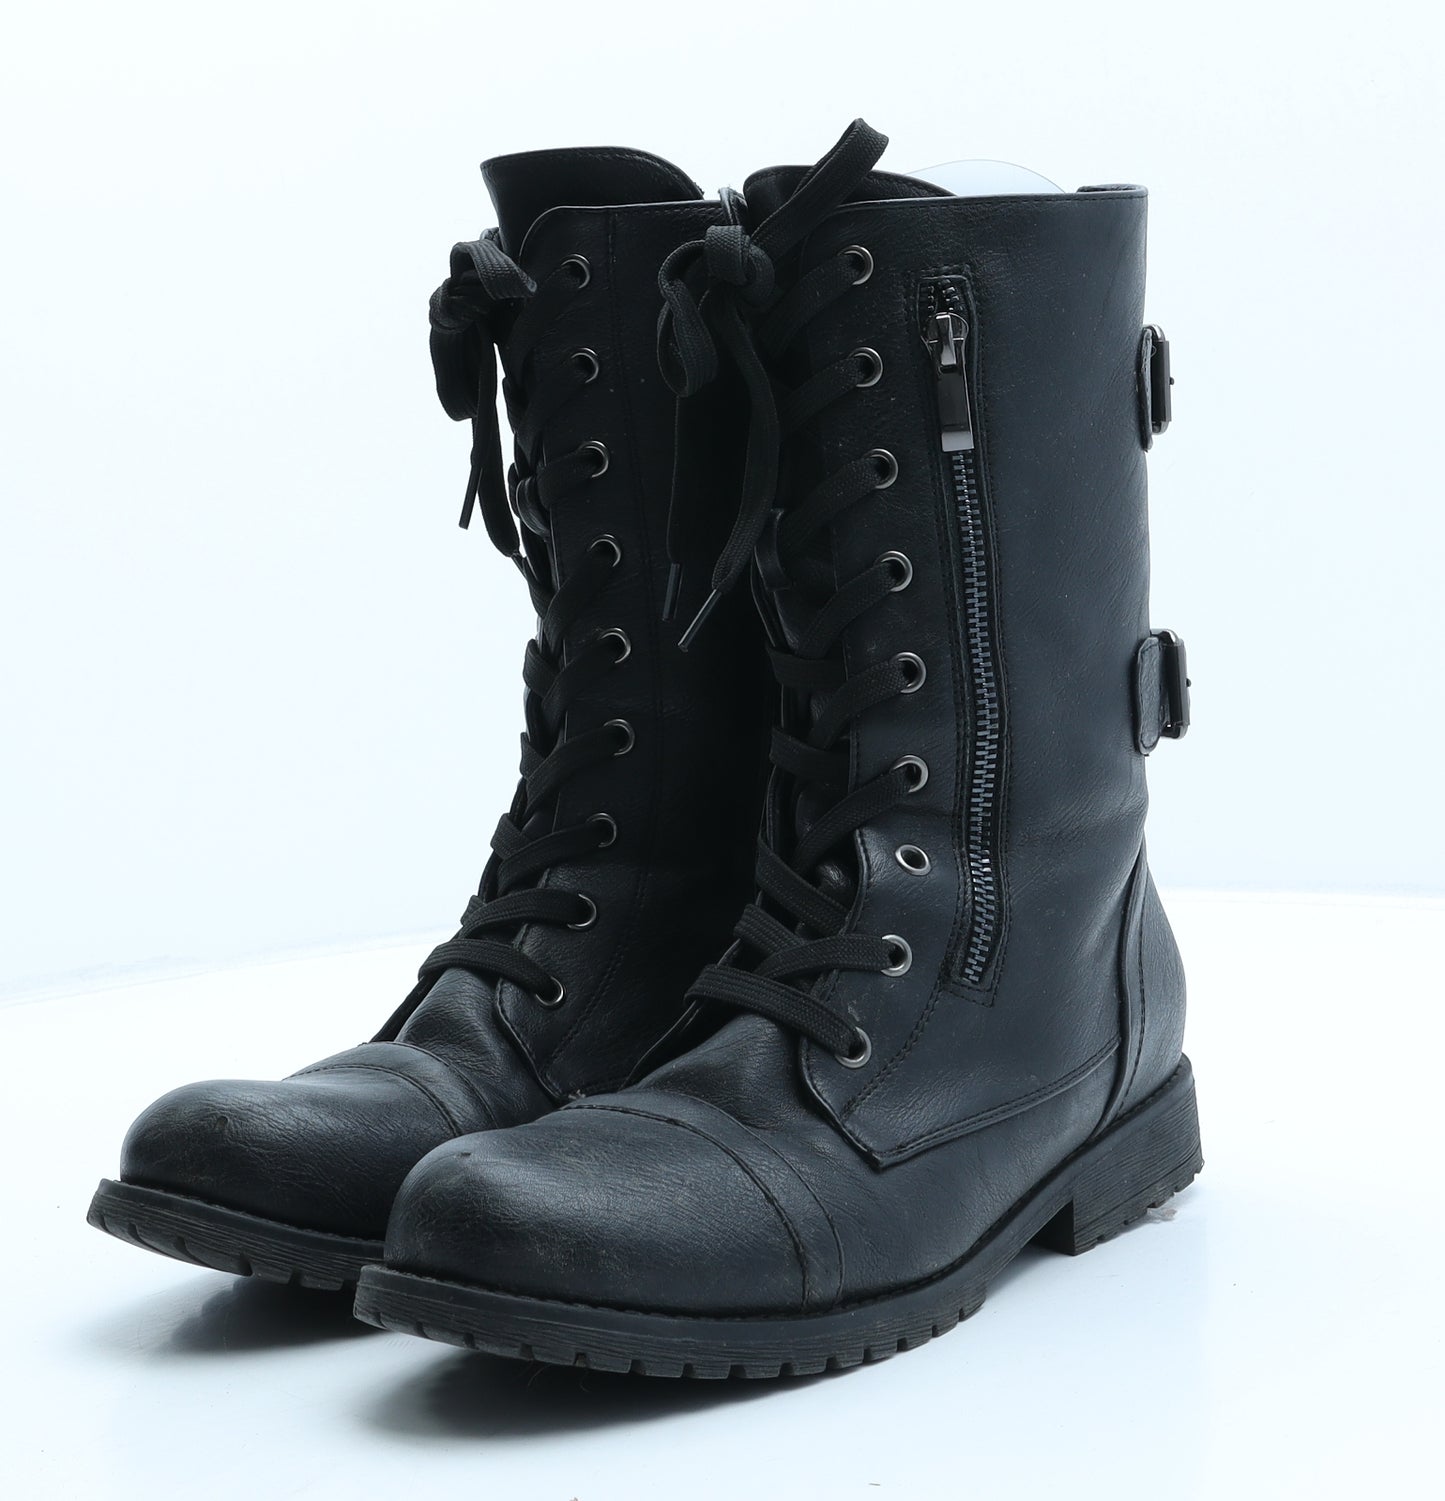 DreamPairs Womens Black Leather Combat Boot UK 7 40